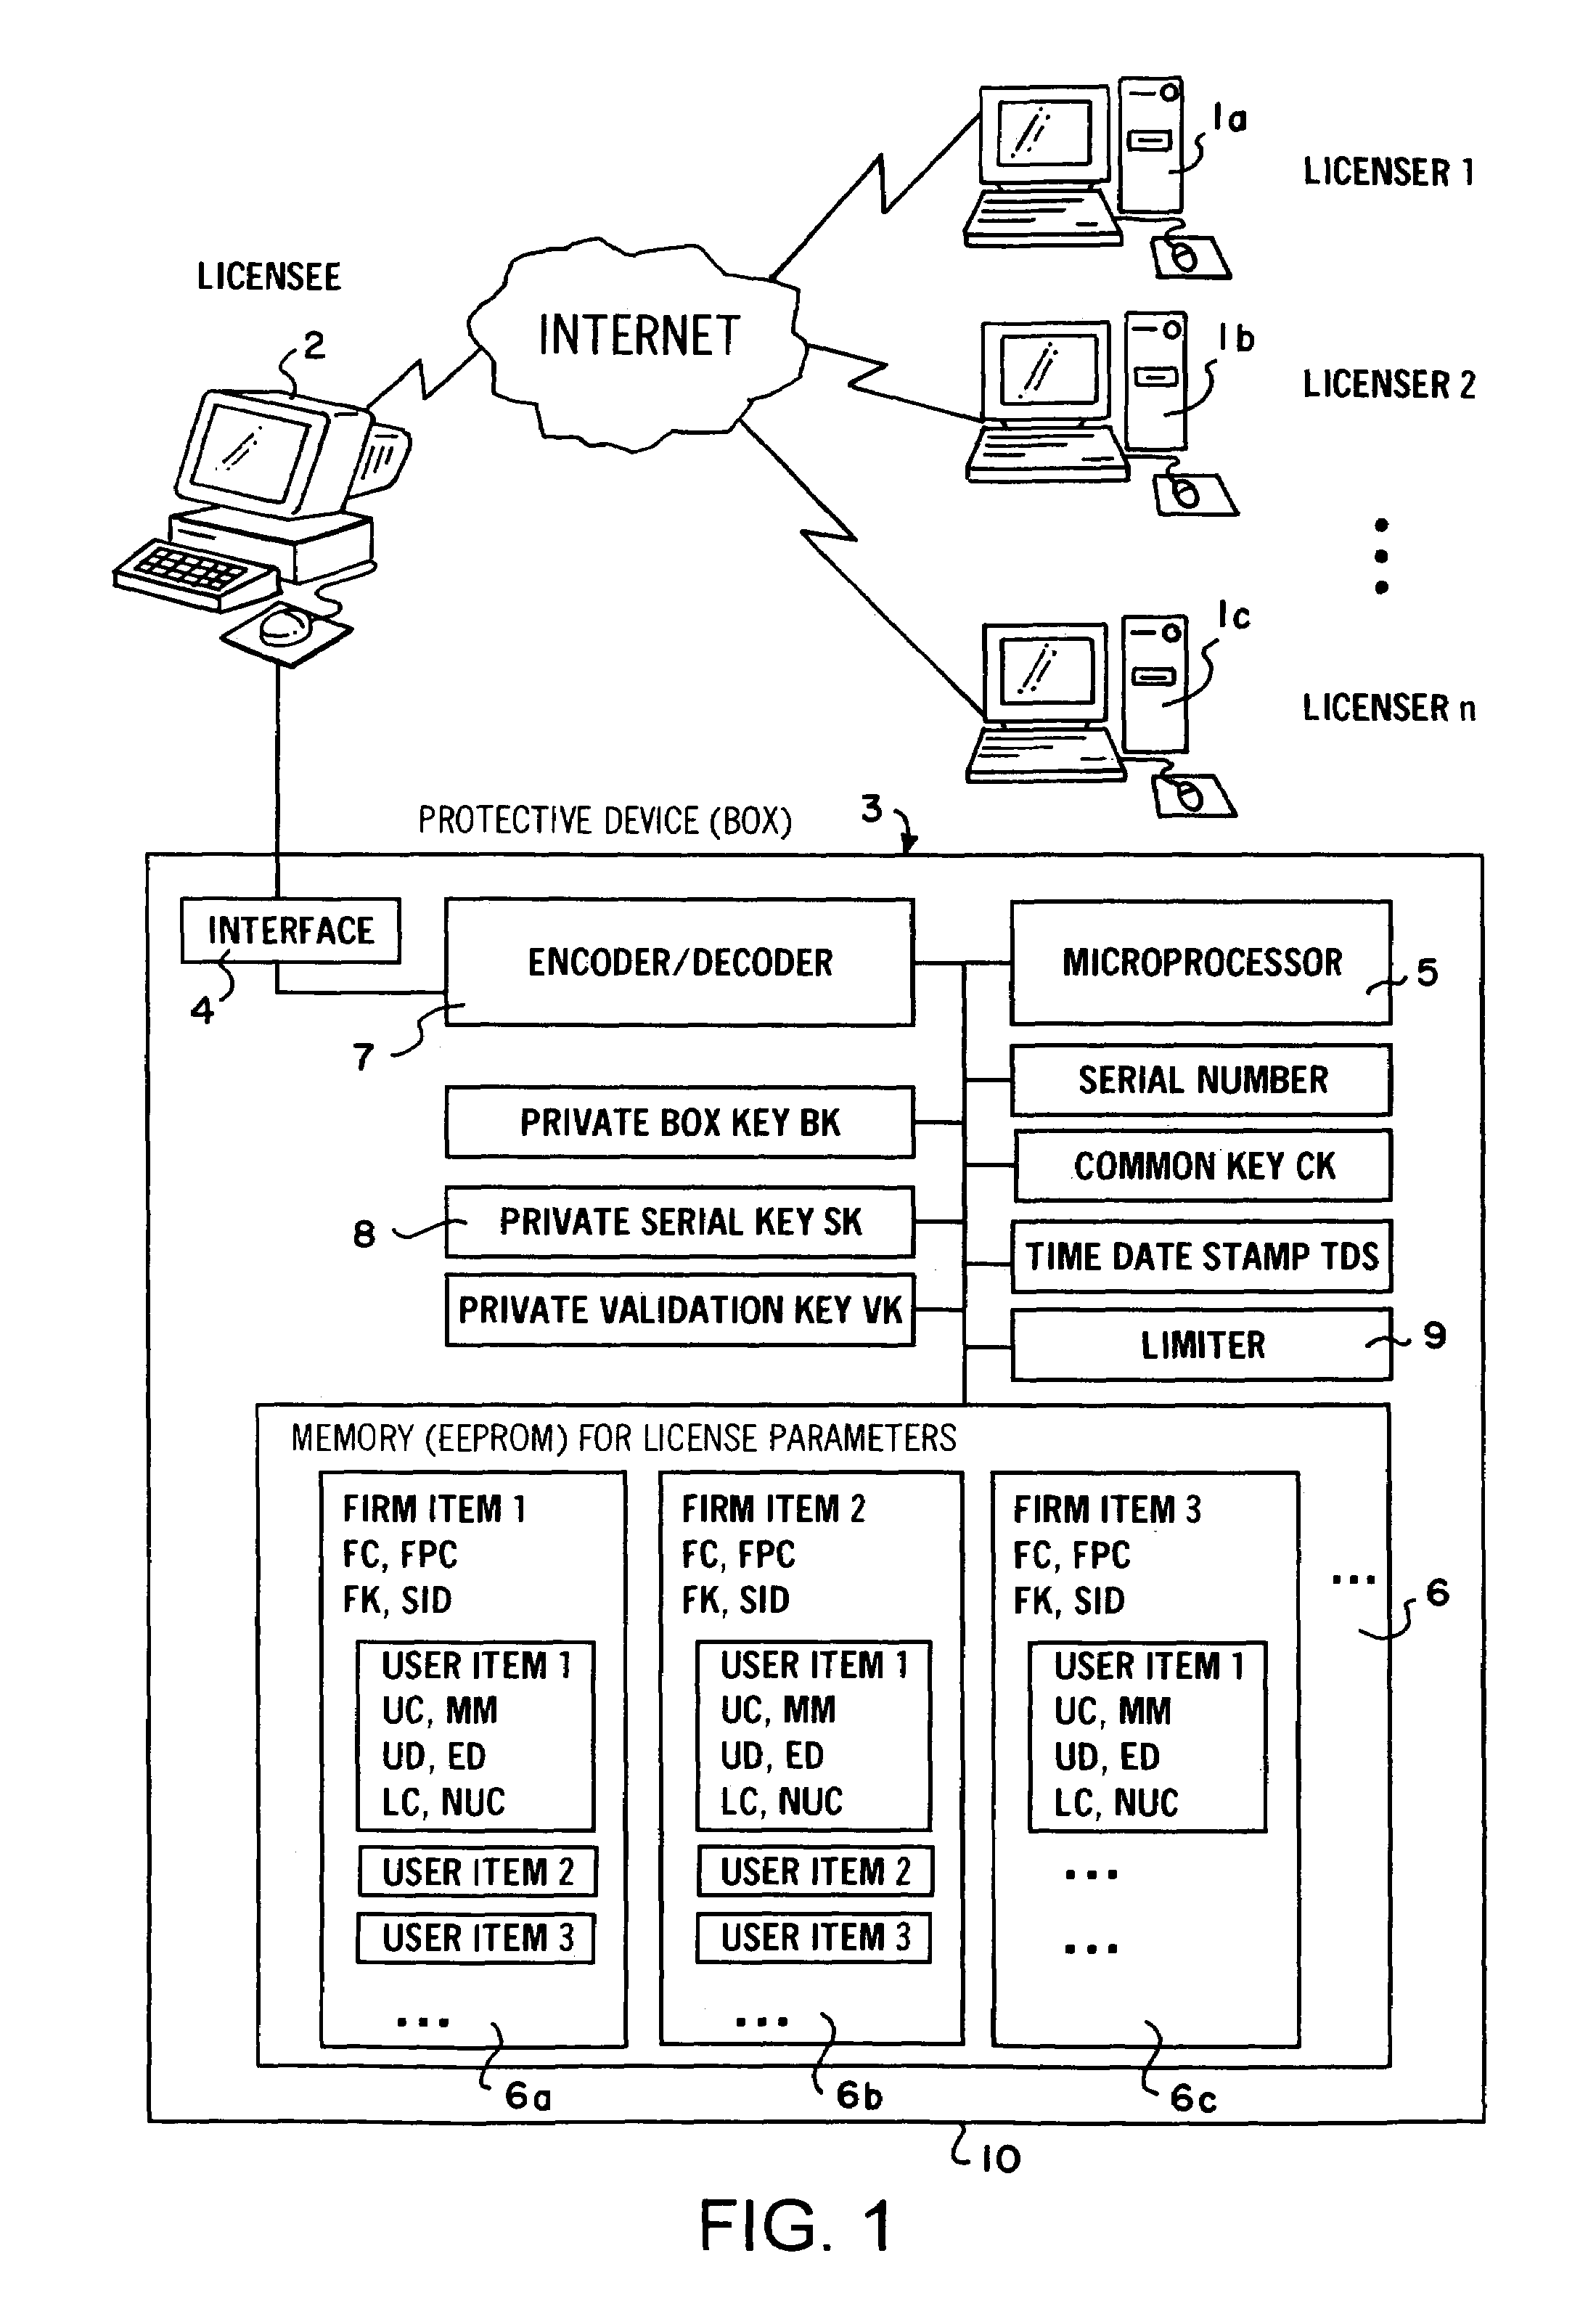 Procedure for the protection of computer software and/or computer-readable data as well as protective equipment